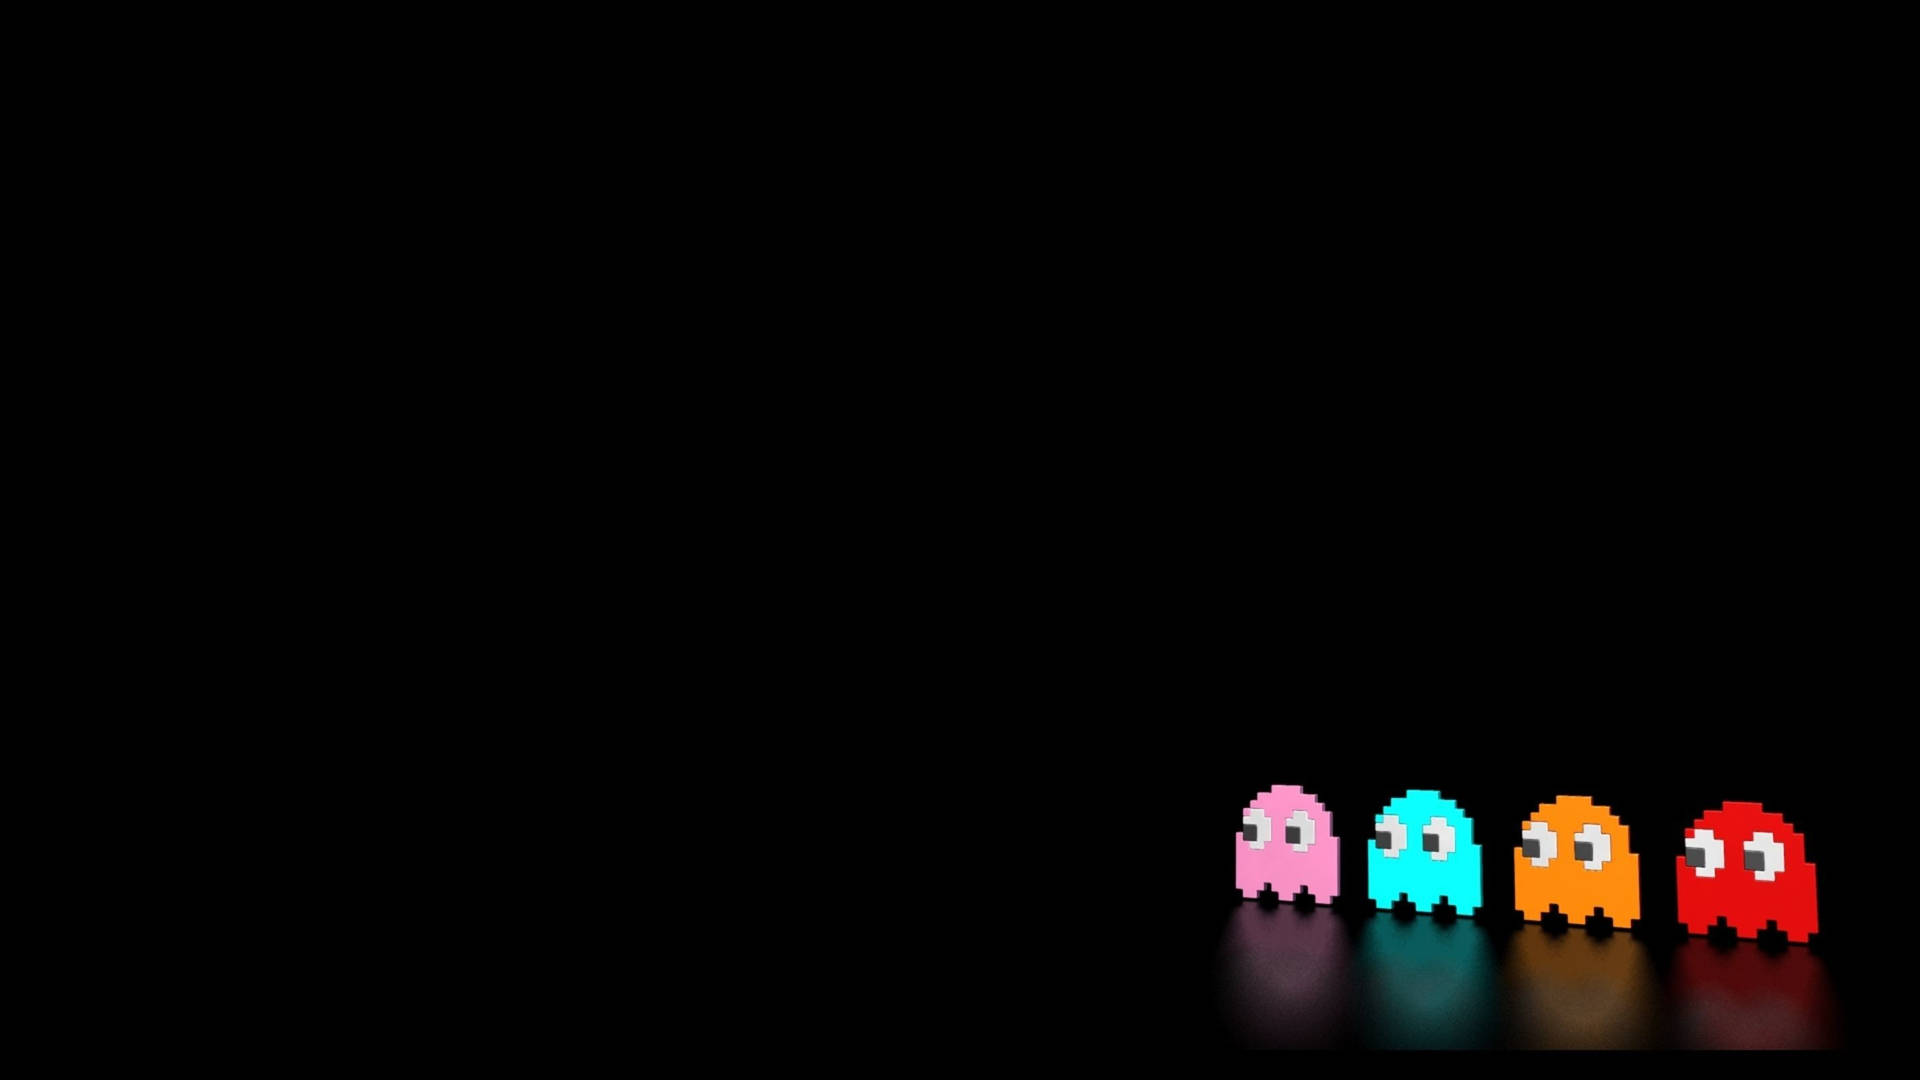 Aesthetic Retro Pac-man Ghosts Background